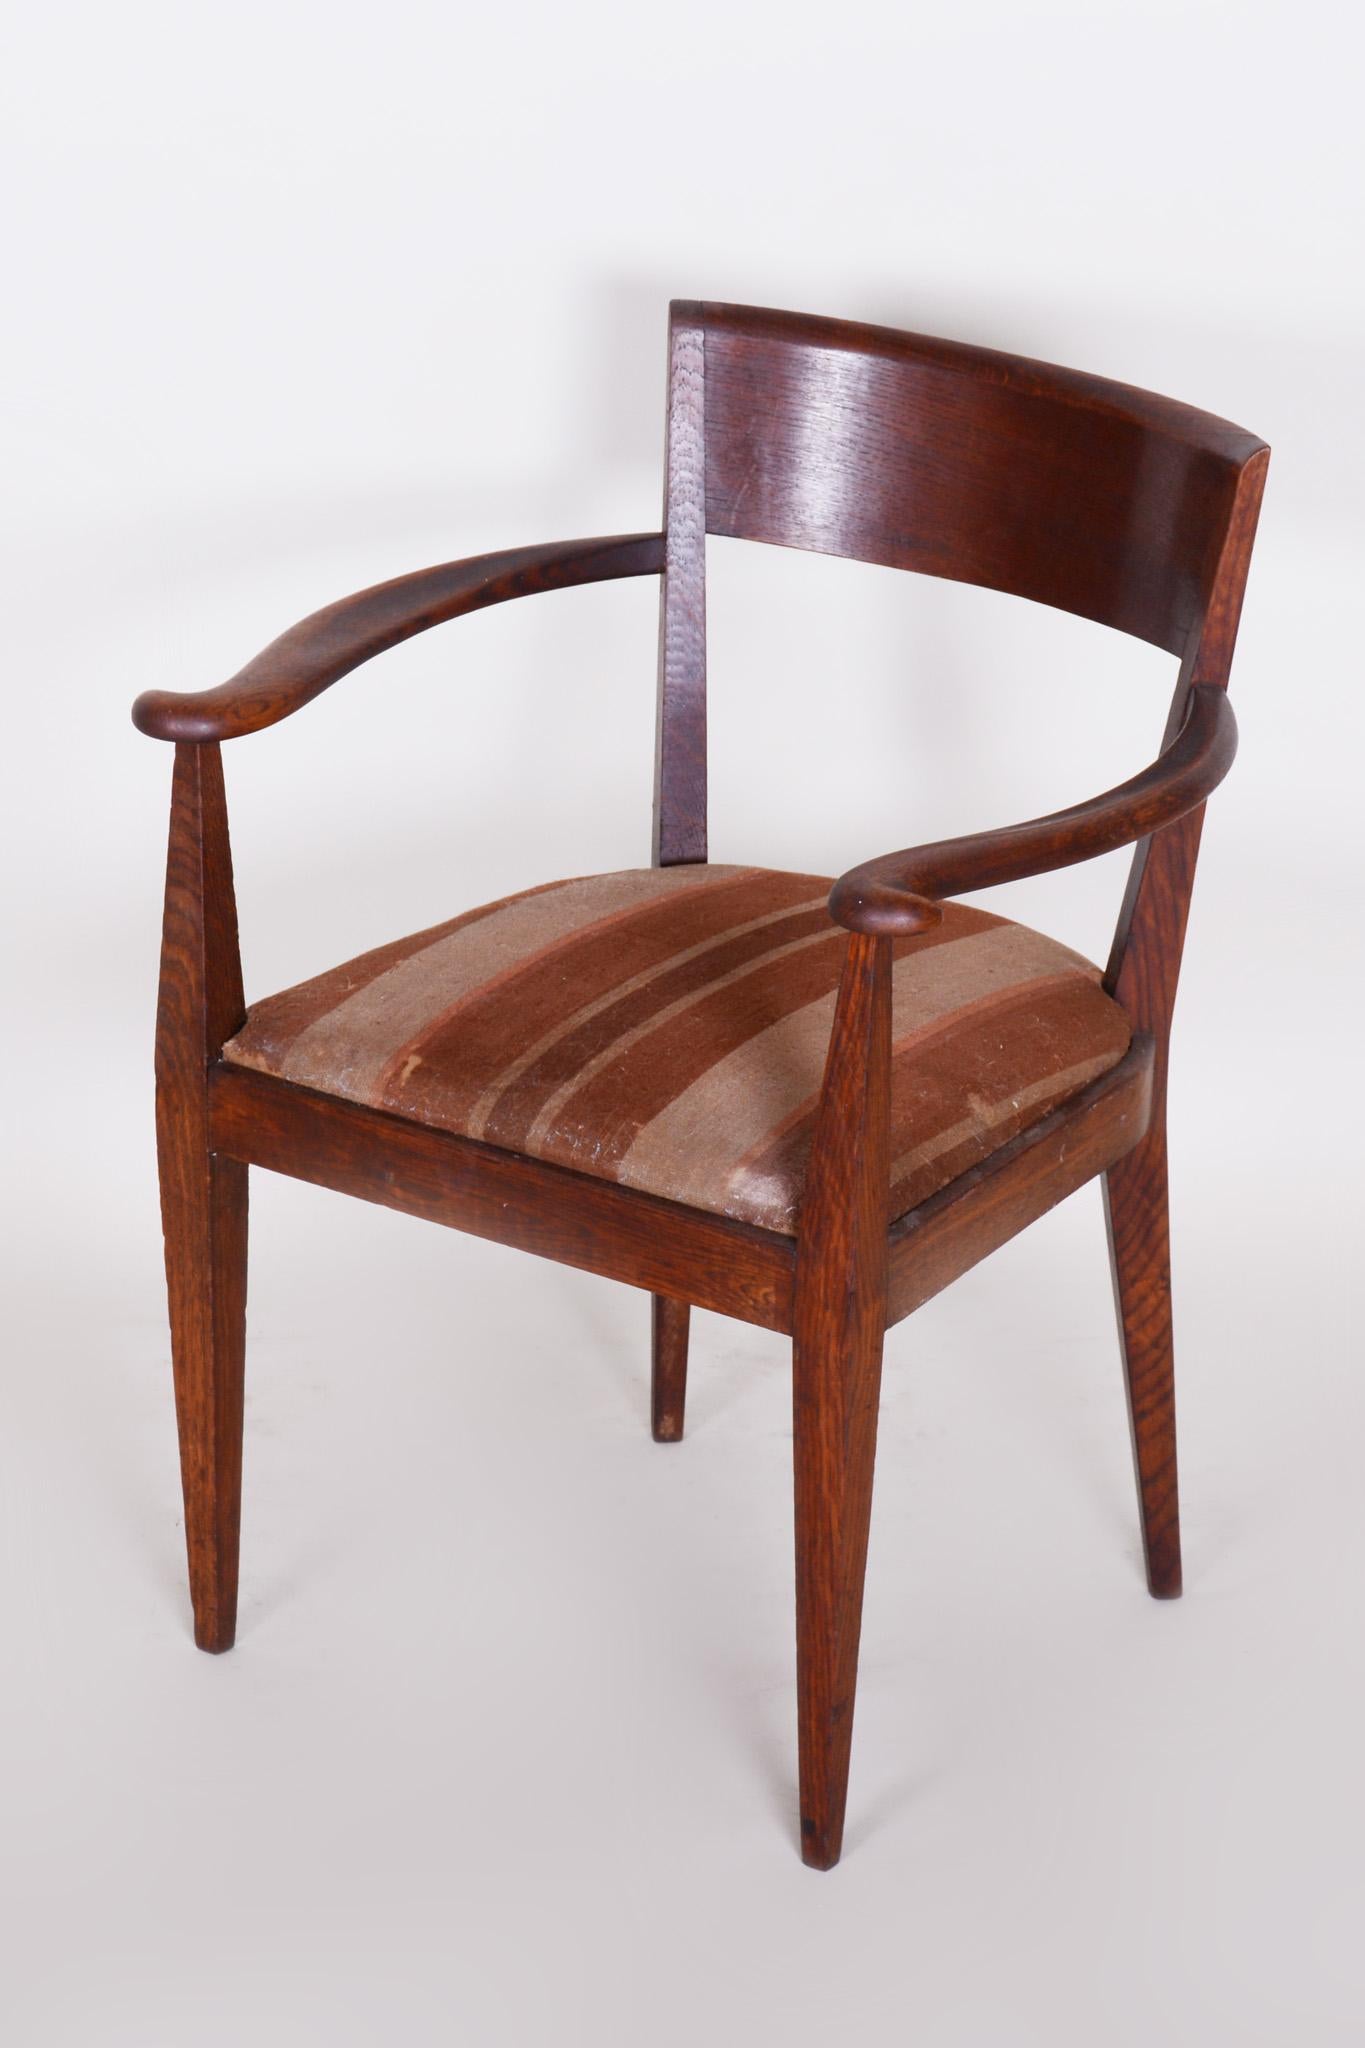 20th Century Brown Oak Cubist Art Deco Armchair, Original Well Preserved Condition, 1920s For Sale